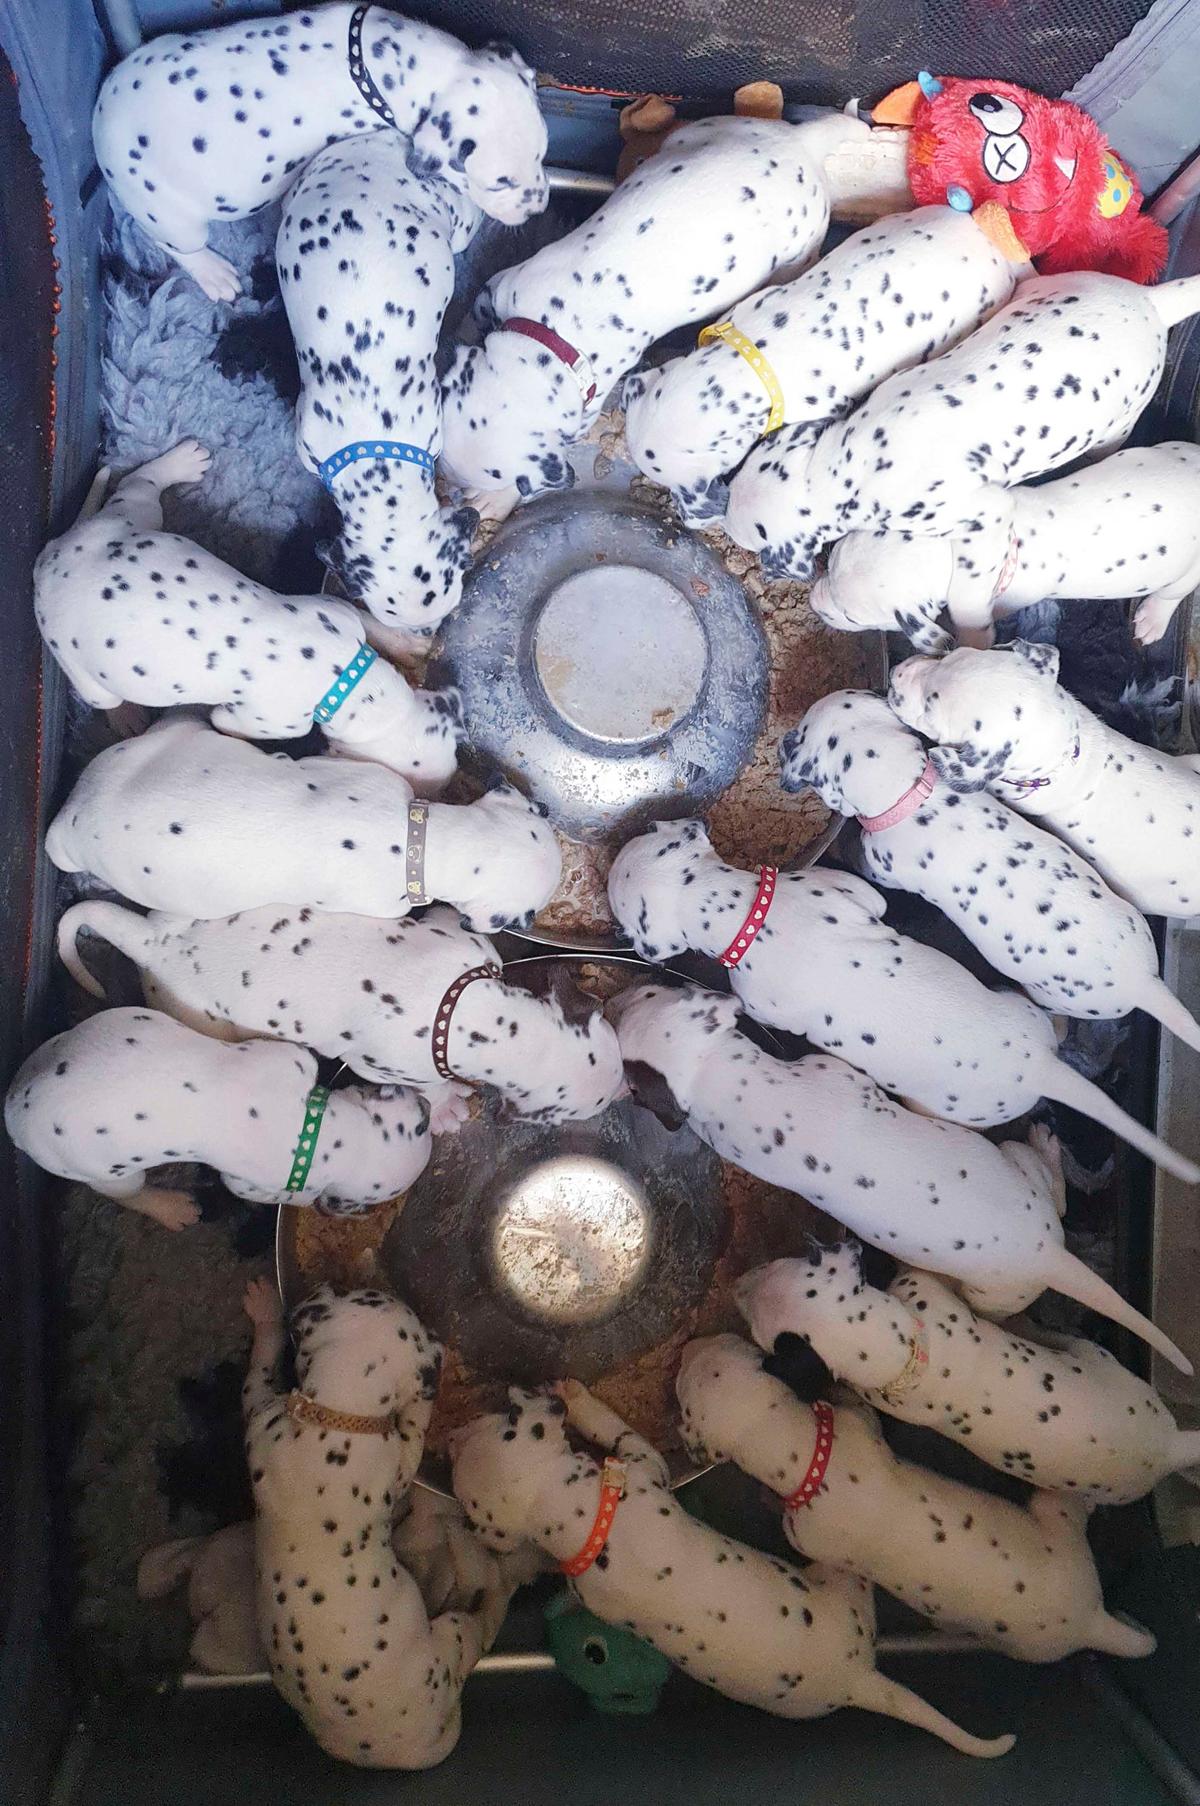 Nellie's litter of dalmatian puppies. (Caters News)